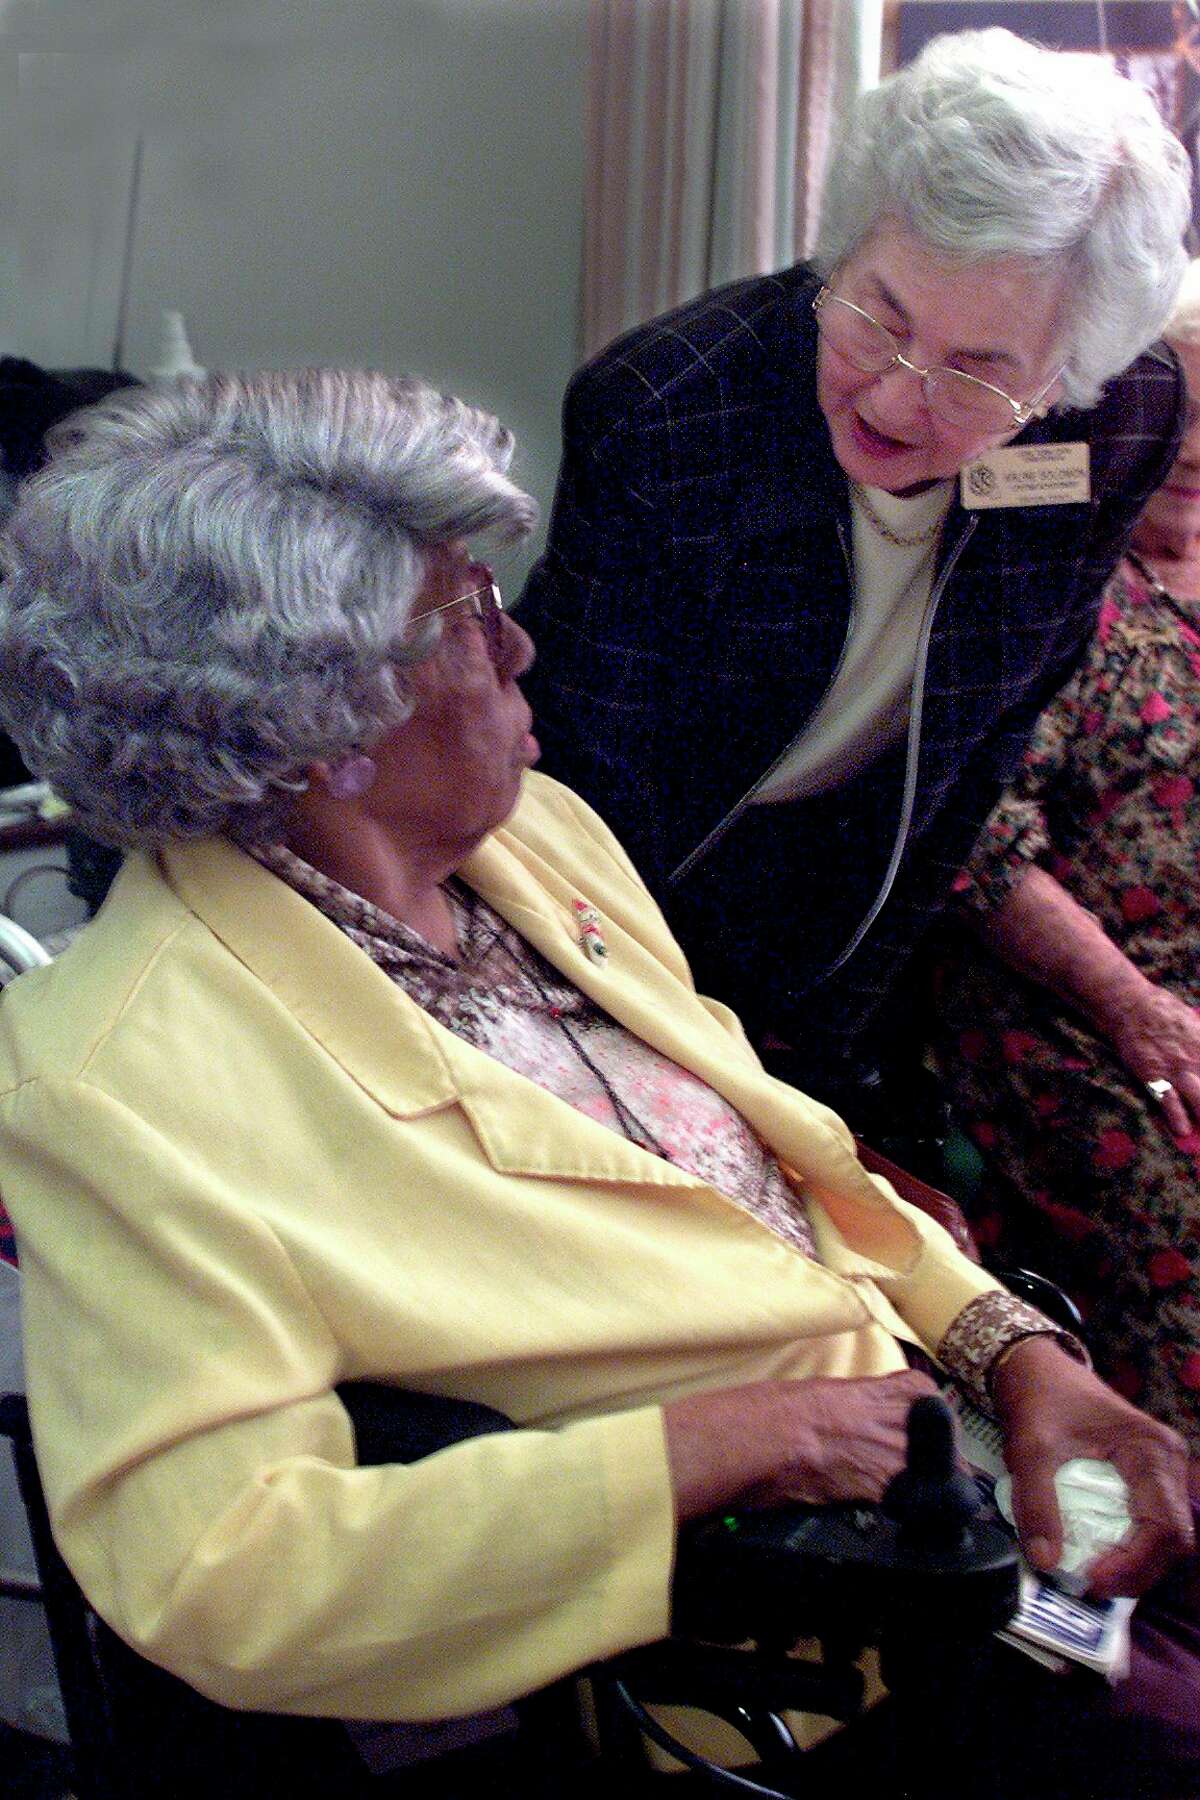 Arline Solomon, right, who volunteers with a Long Term Care Ombudsman Program, speaks with a resident of a long-term care facility in Oxnard, California. The Long Term Care Ombudsman Program got its start in 1972. Today, there is an ombudsman program operating in every state across the U.S. (Photo by Anne Cusack/Los Angeles Times via Getty Images)